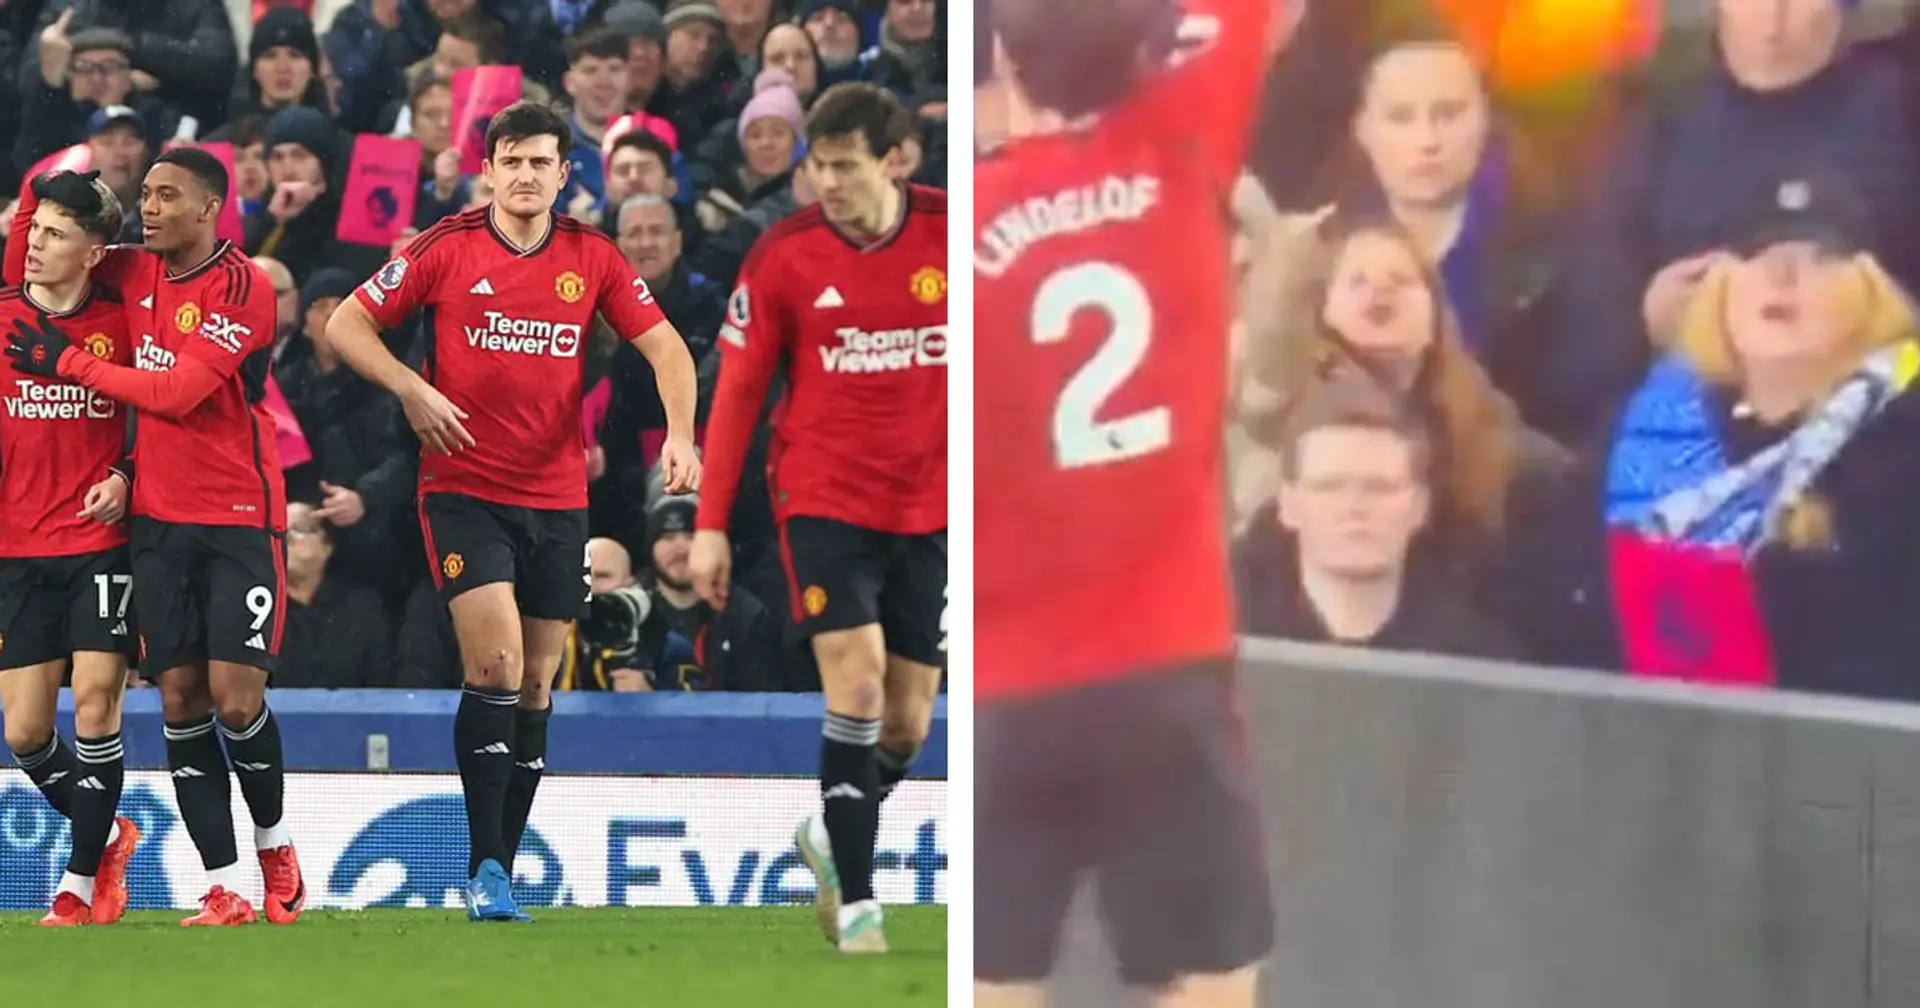 Spotted: Young Everton fan's NSFW gesture at Man United players